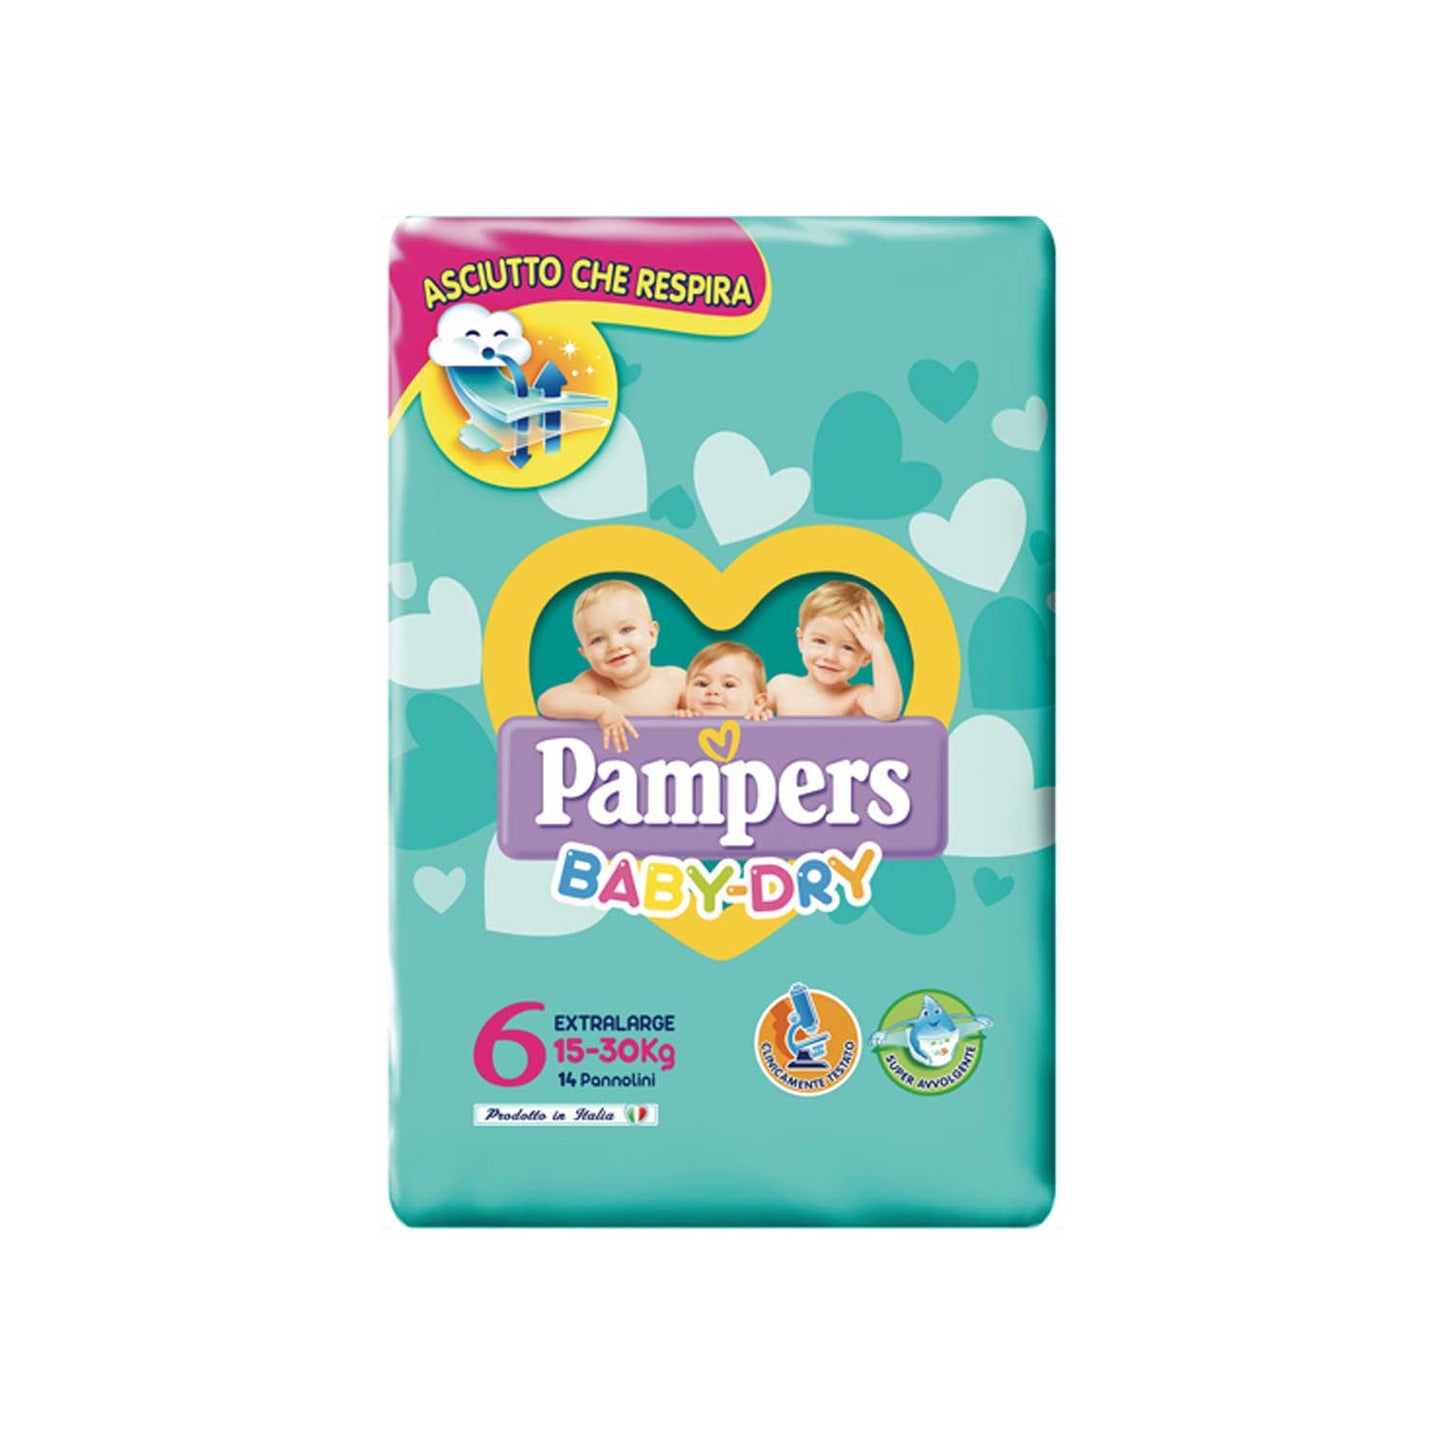 Pampers - Baby Dry Diapers Extra Large 15/30Kg x14 Tg6